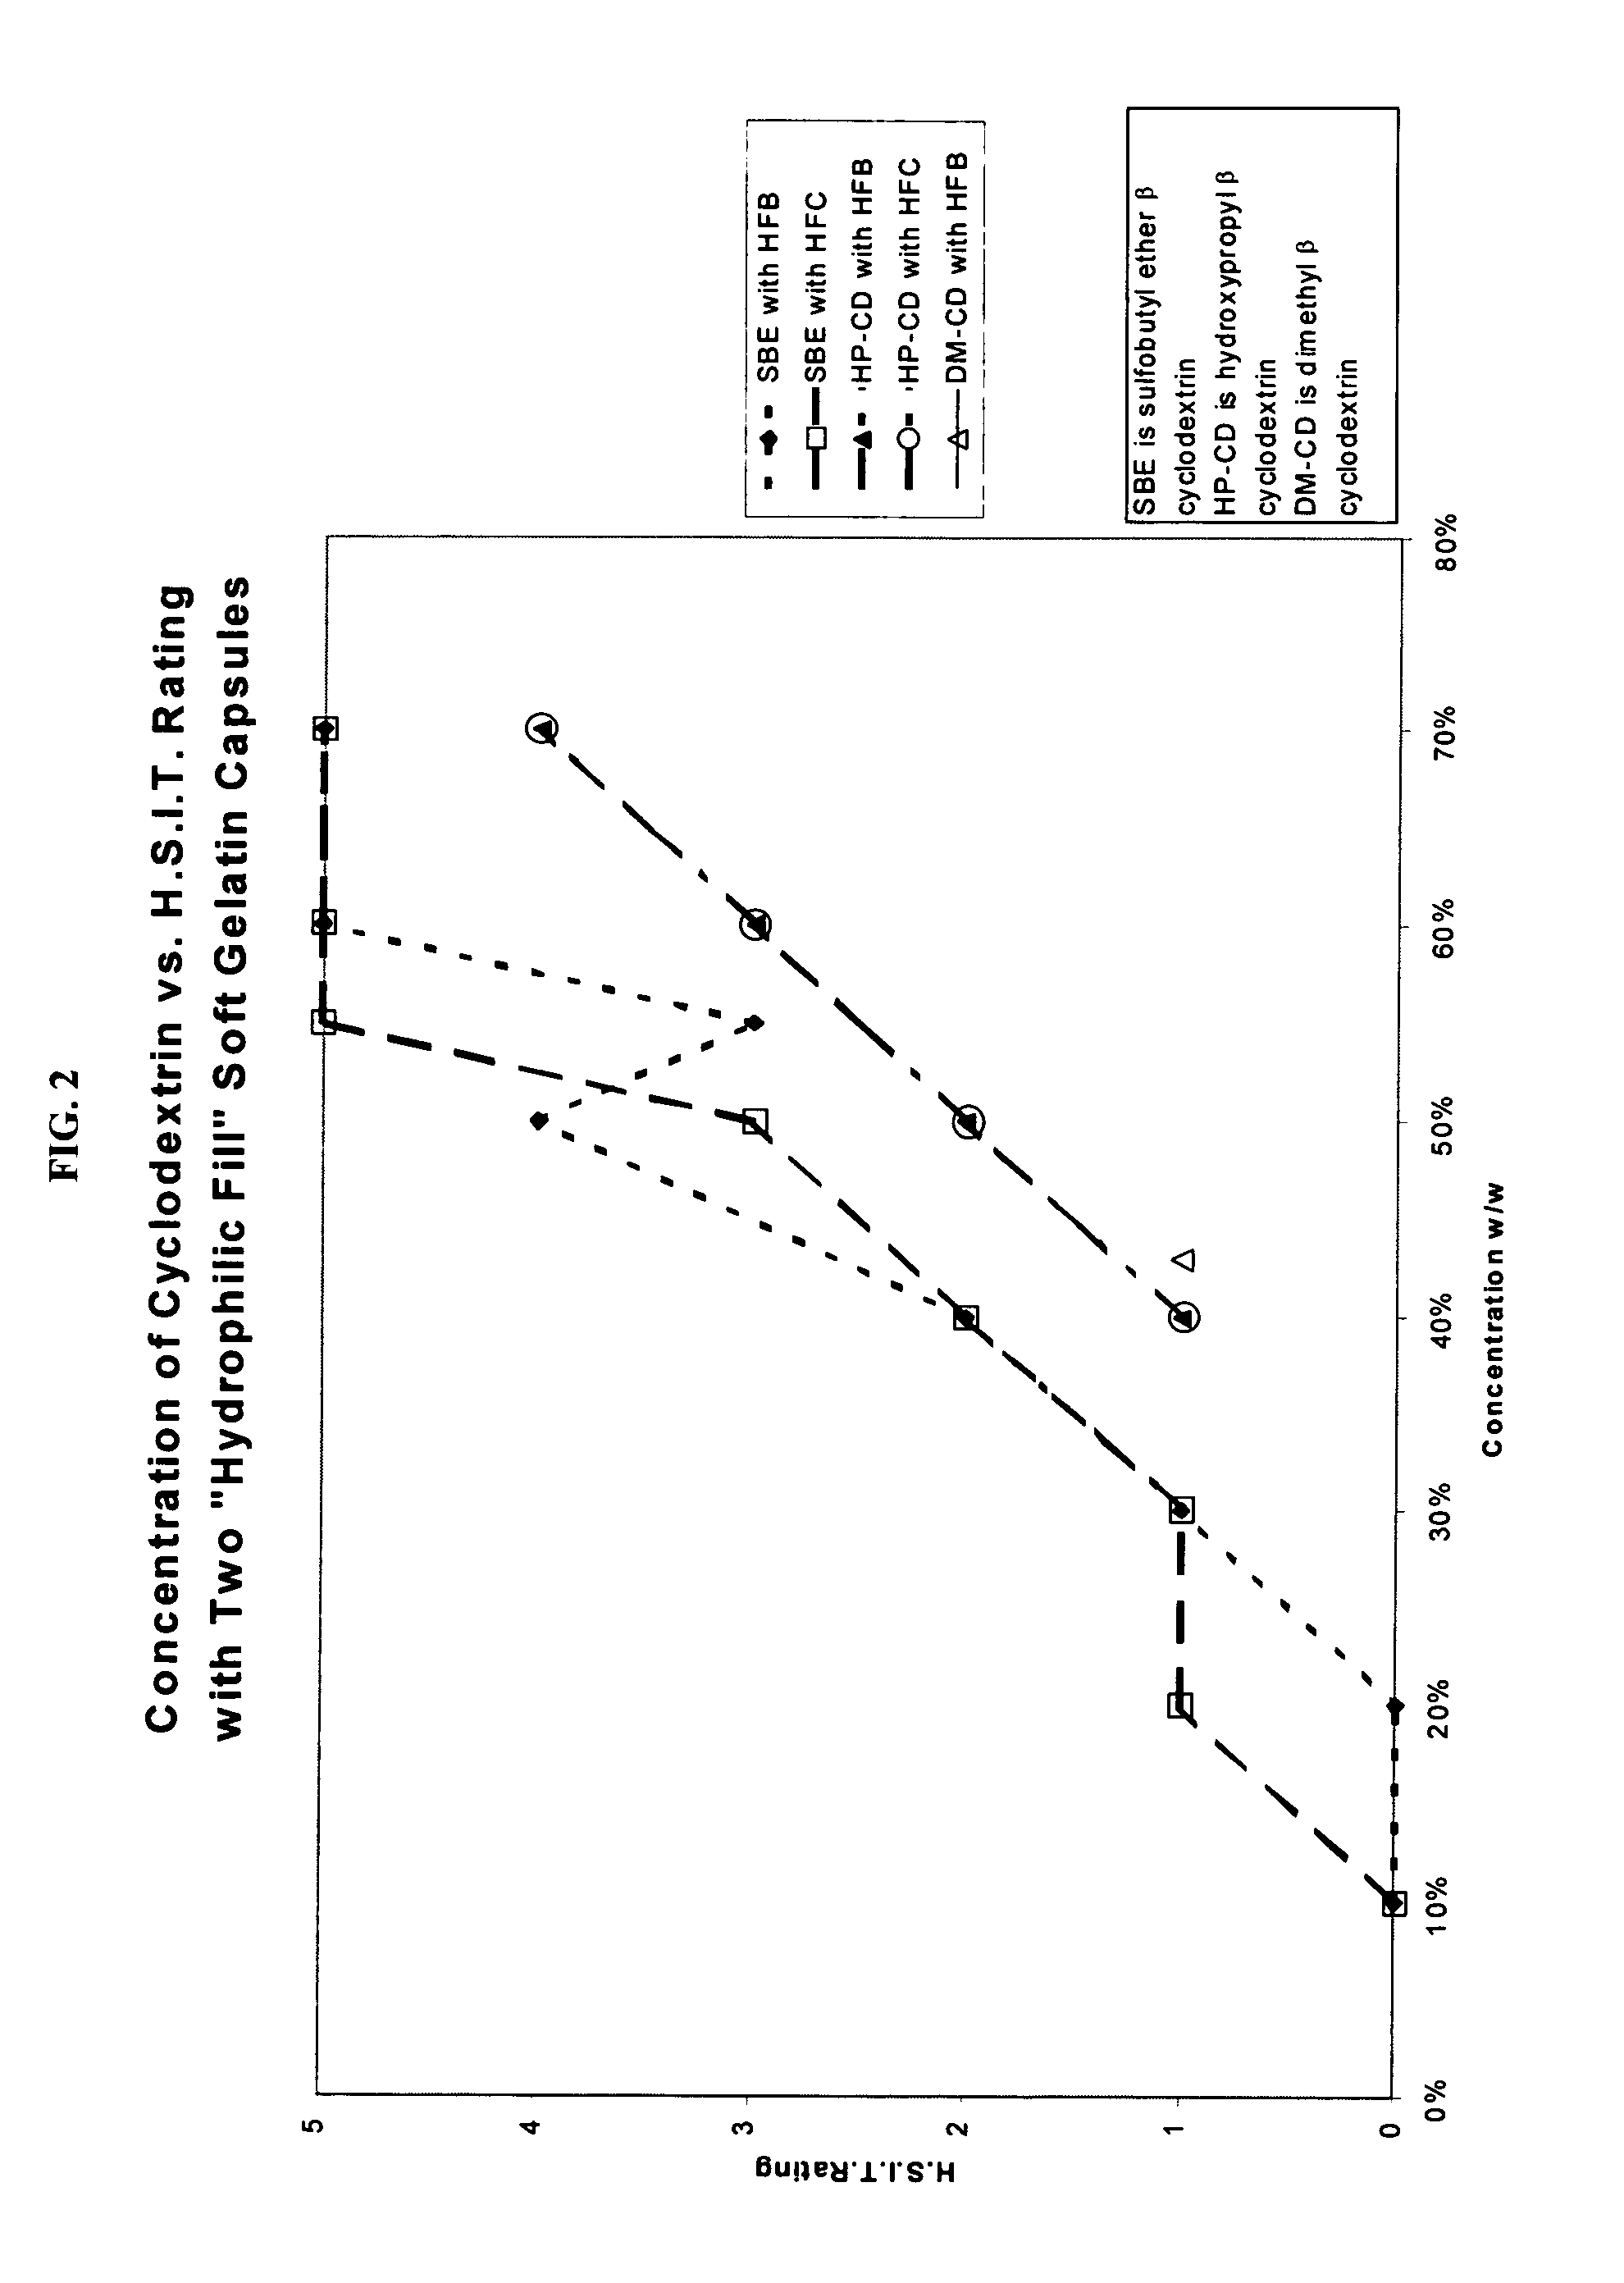 Capsules containing aqueous fill compositions stabilized with derivatized cyclodextrin